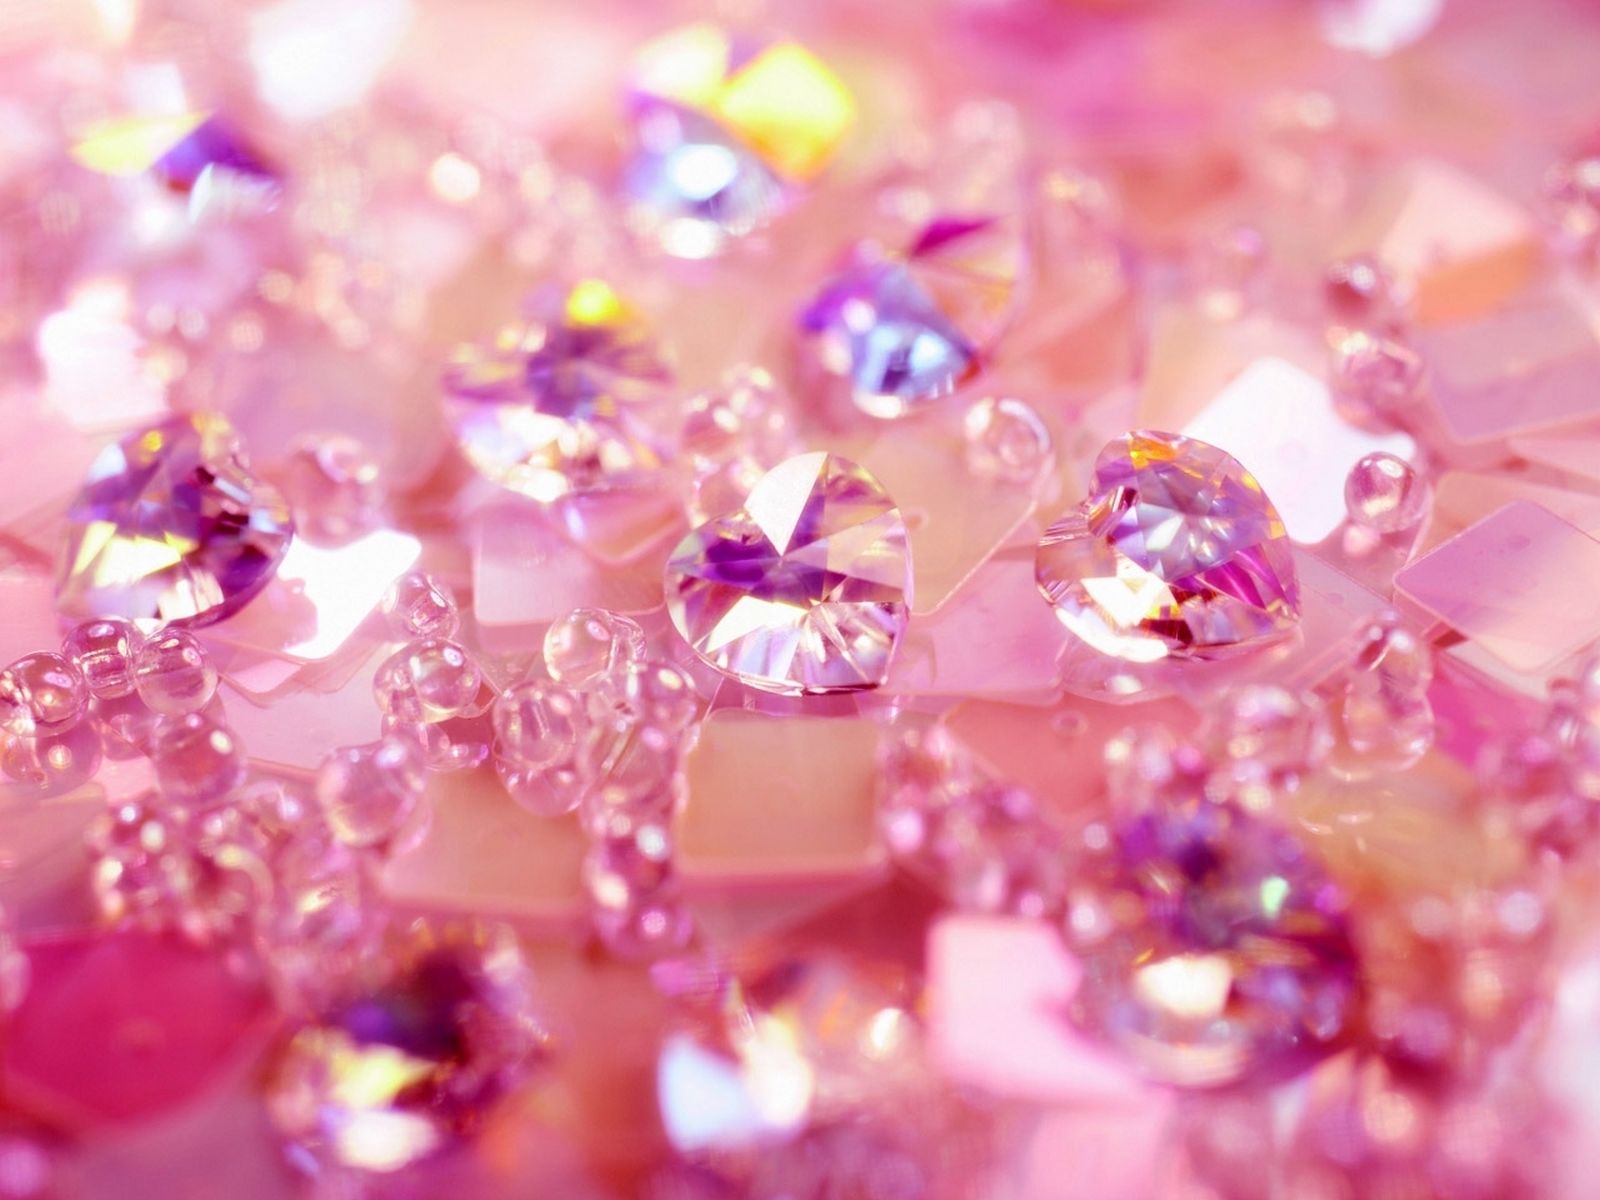 A close up of pink and purple crystals - Diamond, bling